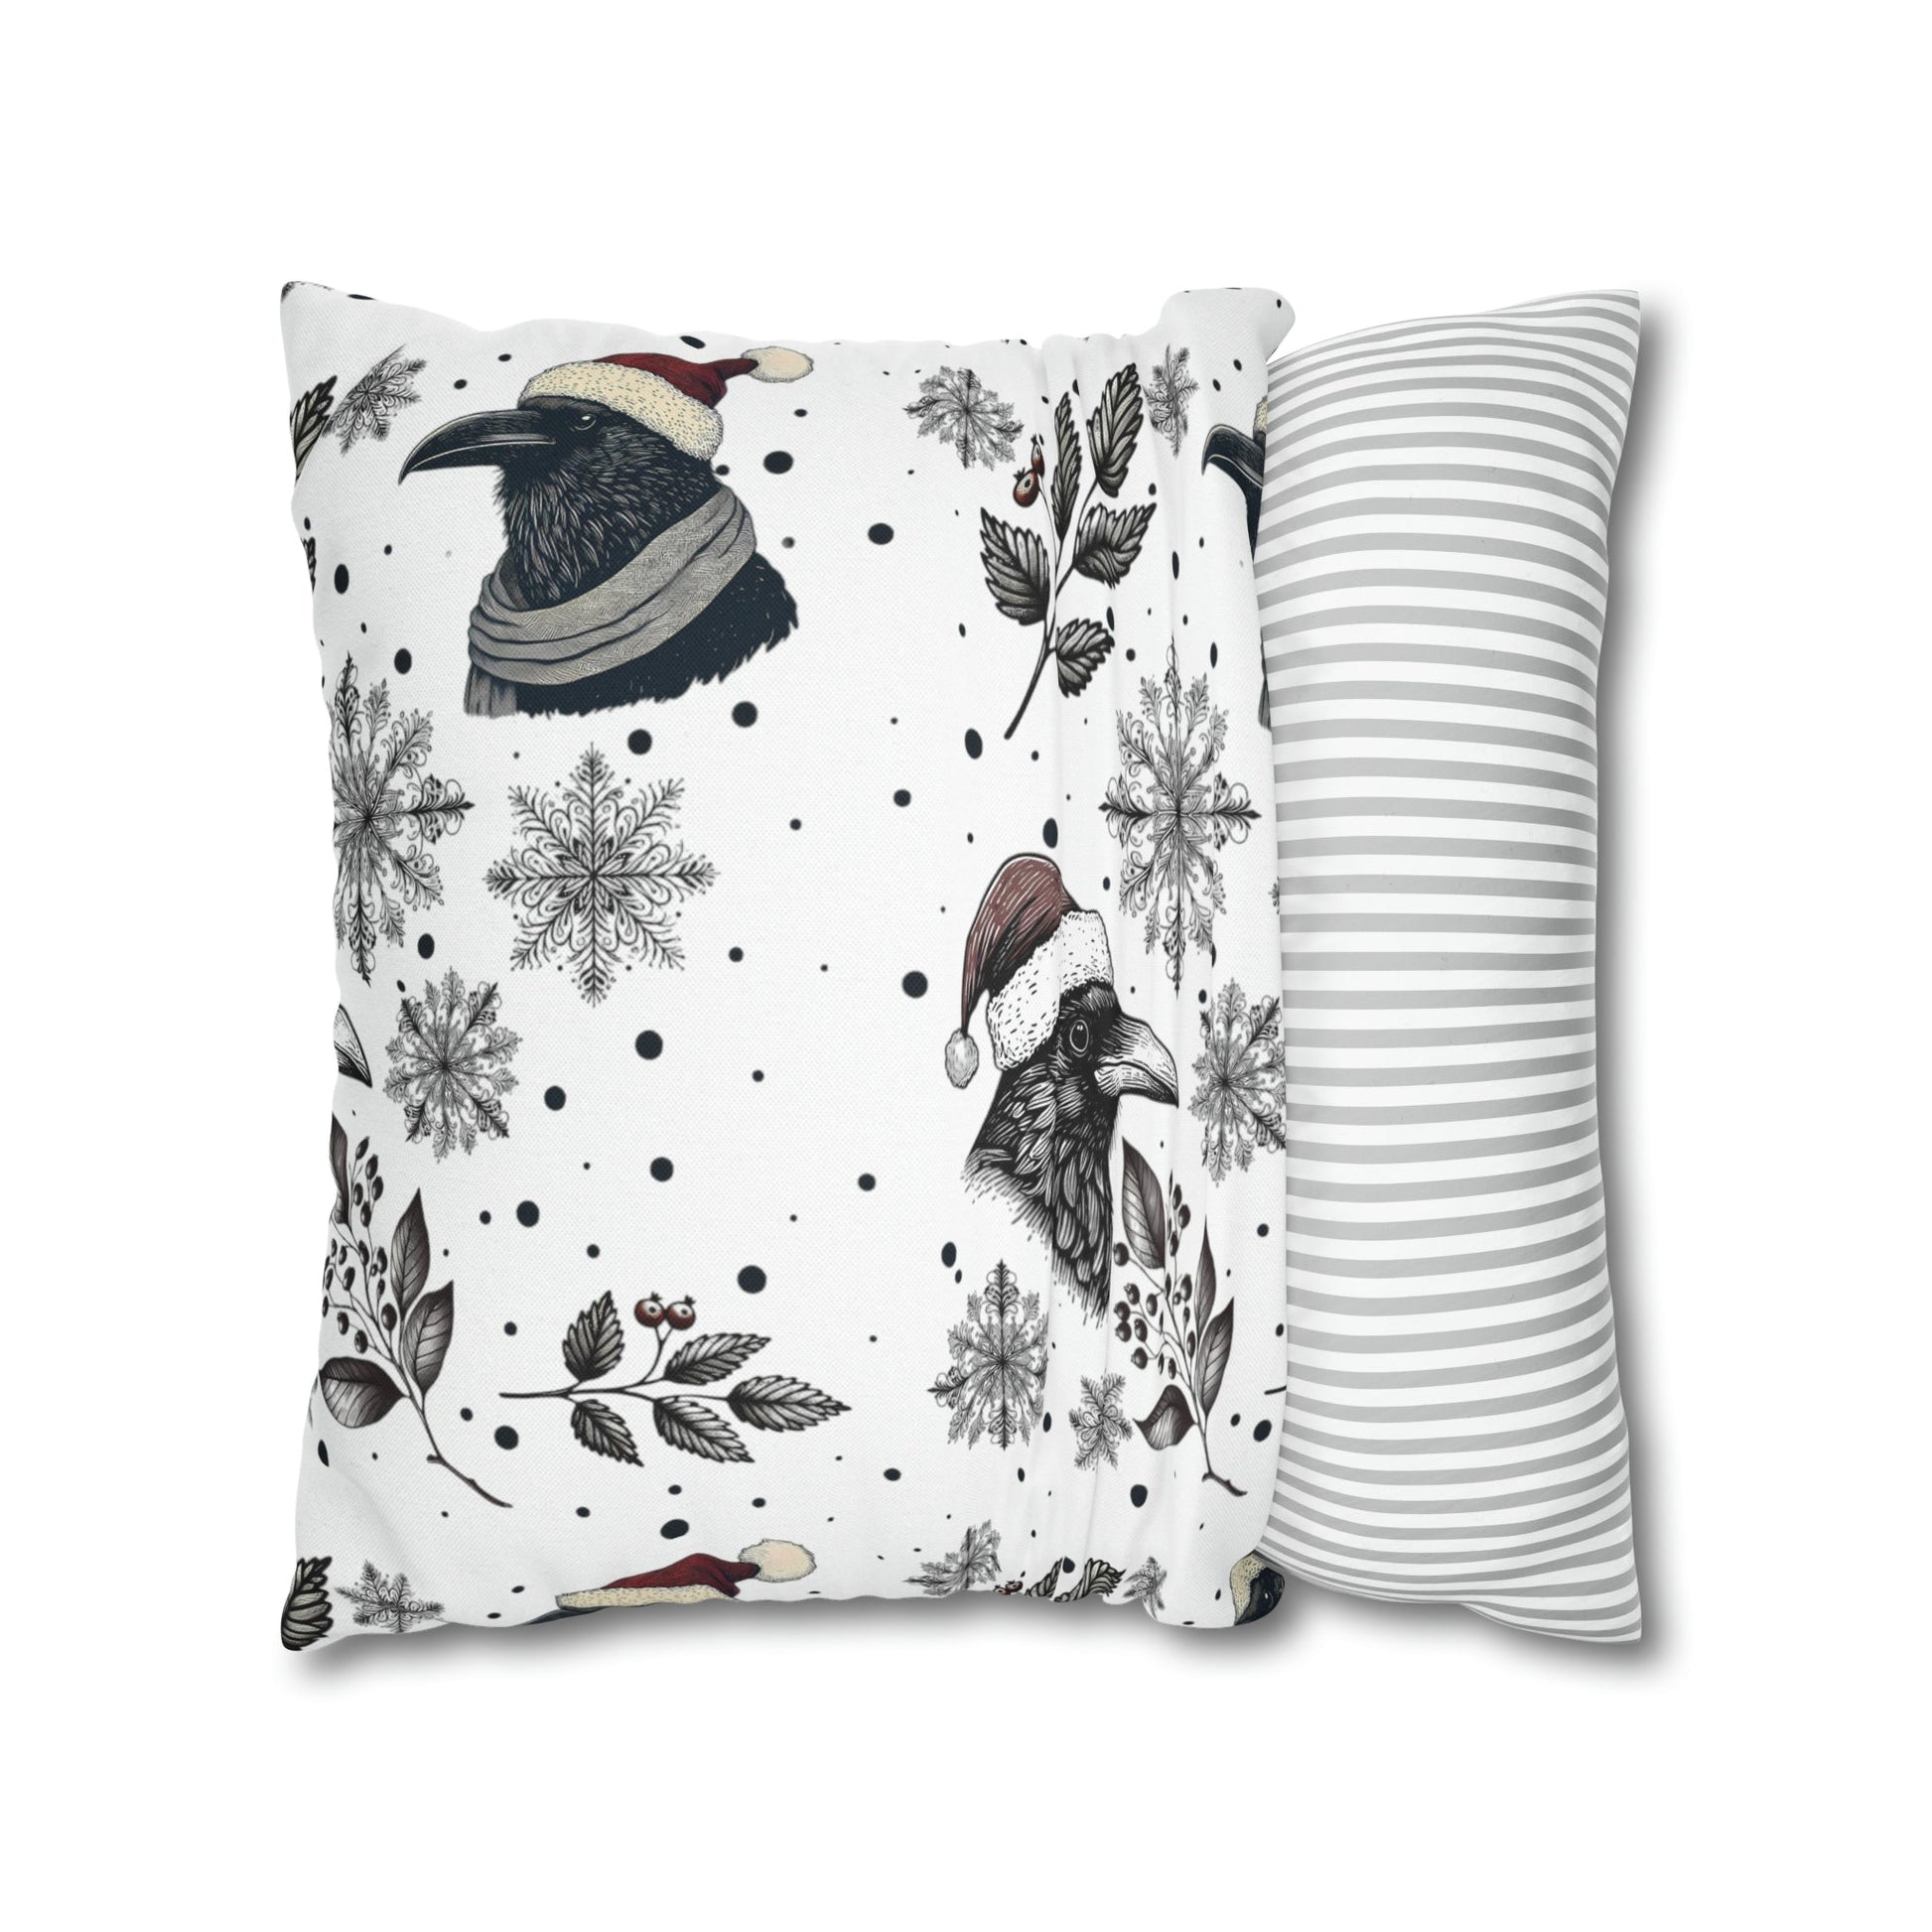 Christmas Ravens and Snowflakes Square Pillow CaseHome DecorVTZdesigns20" × 20"All Over PrintAOPBed